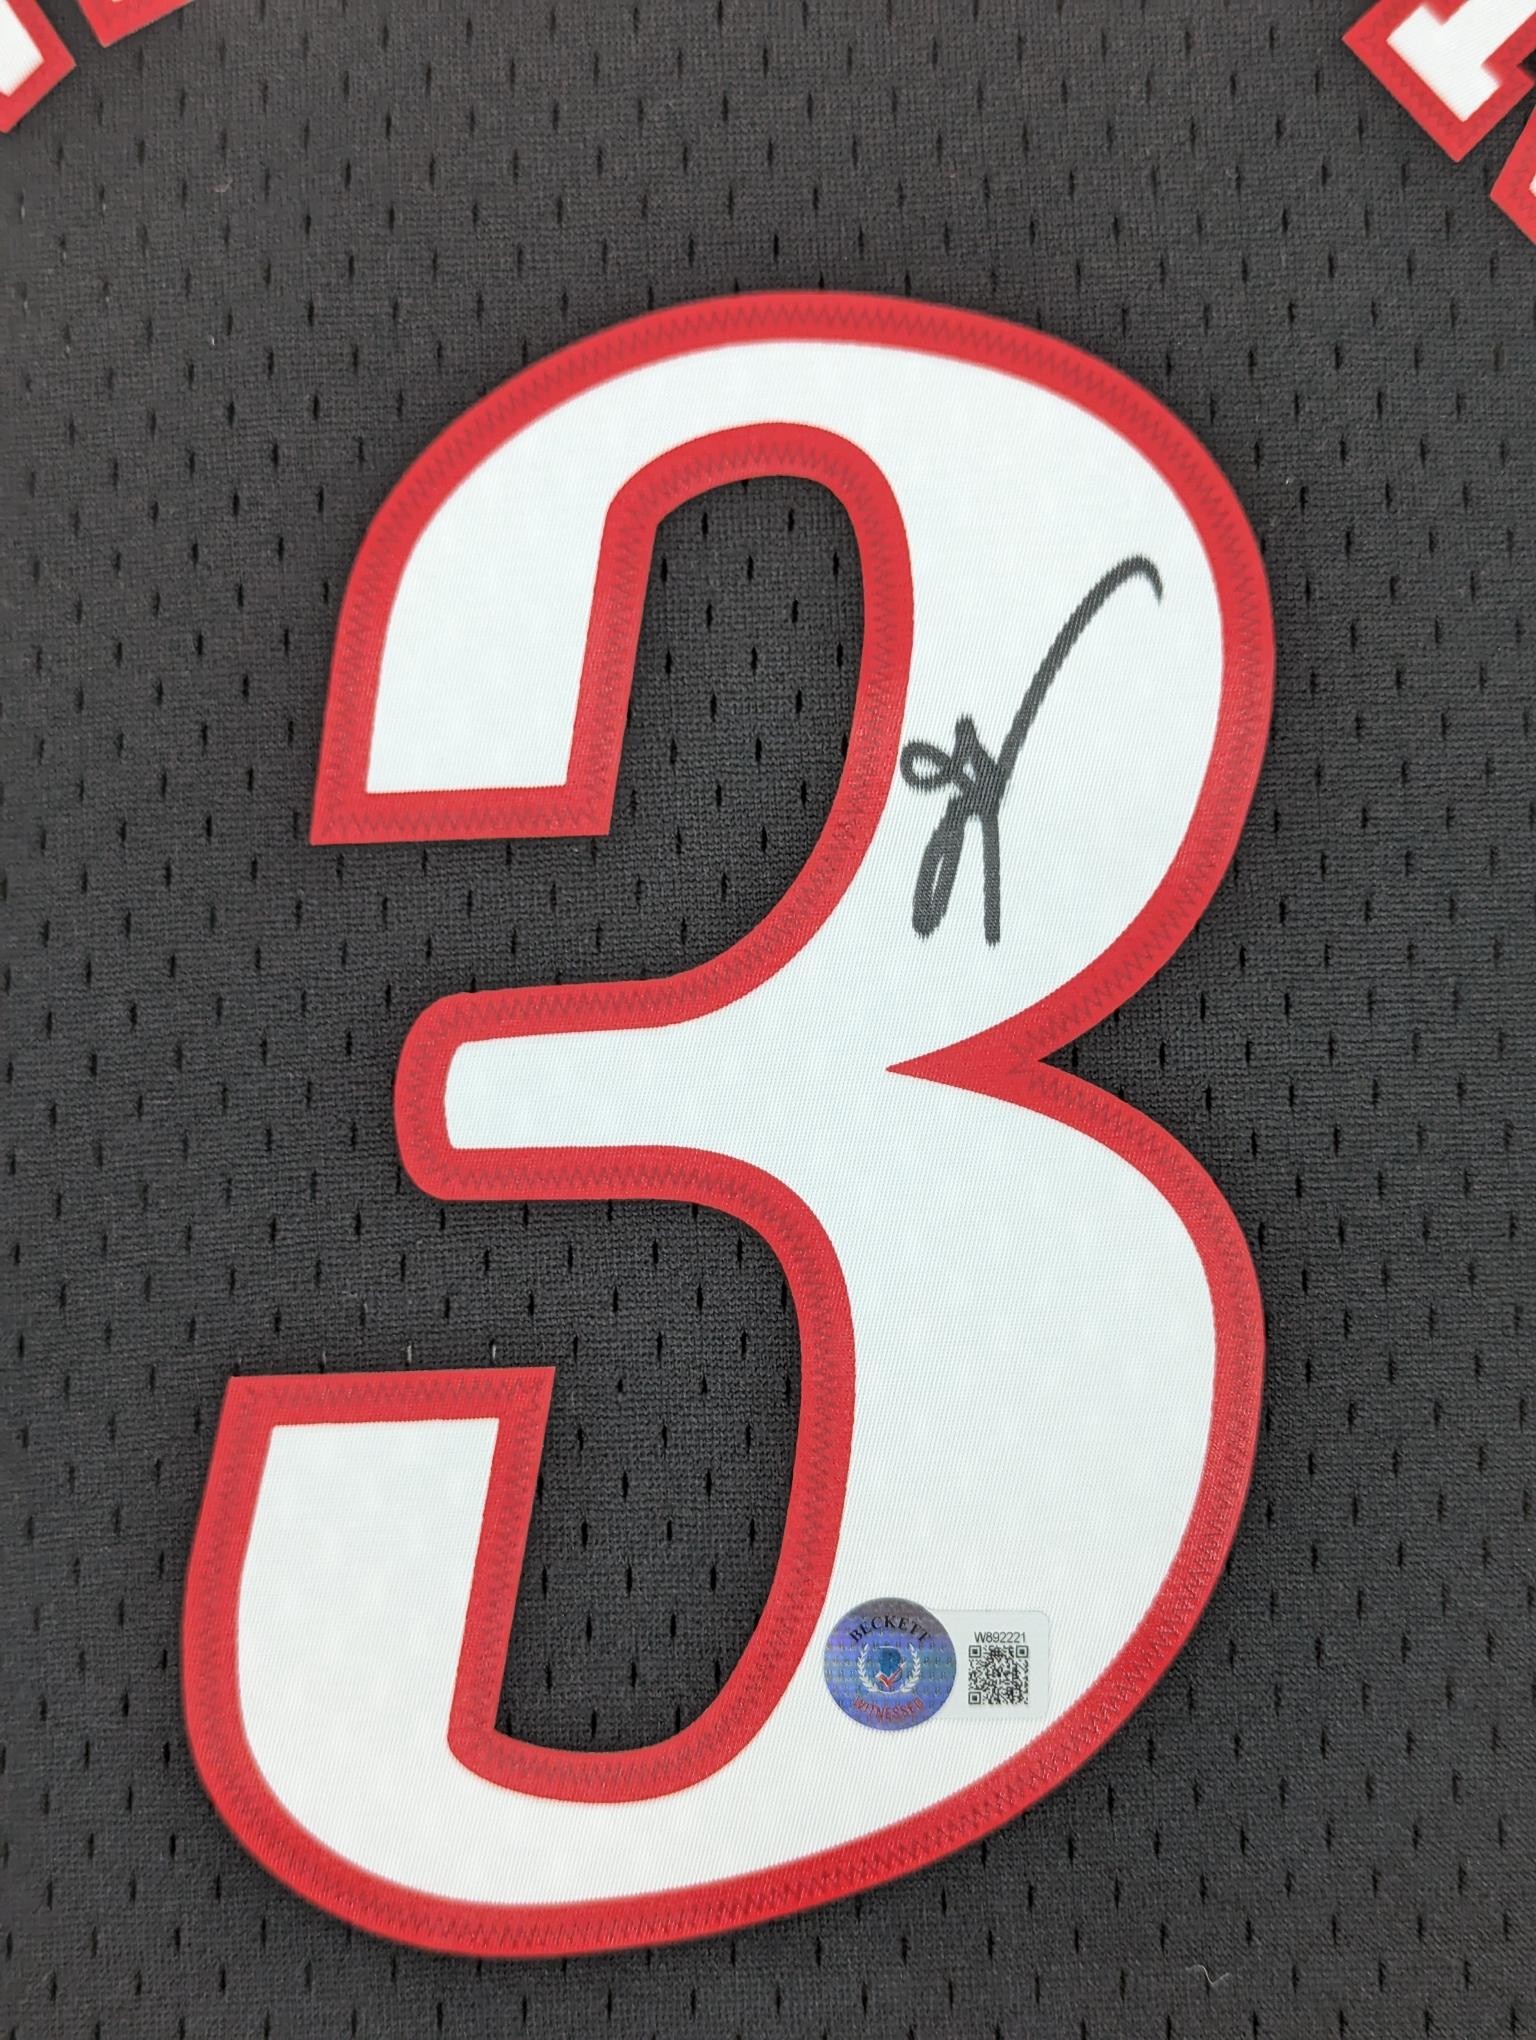 Iverson's Official Philadelphia Signed Jersey - CharityStars